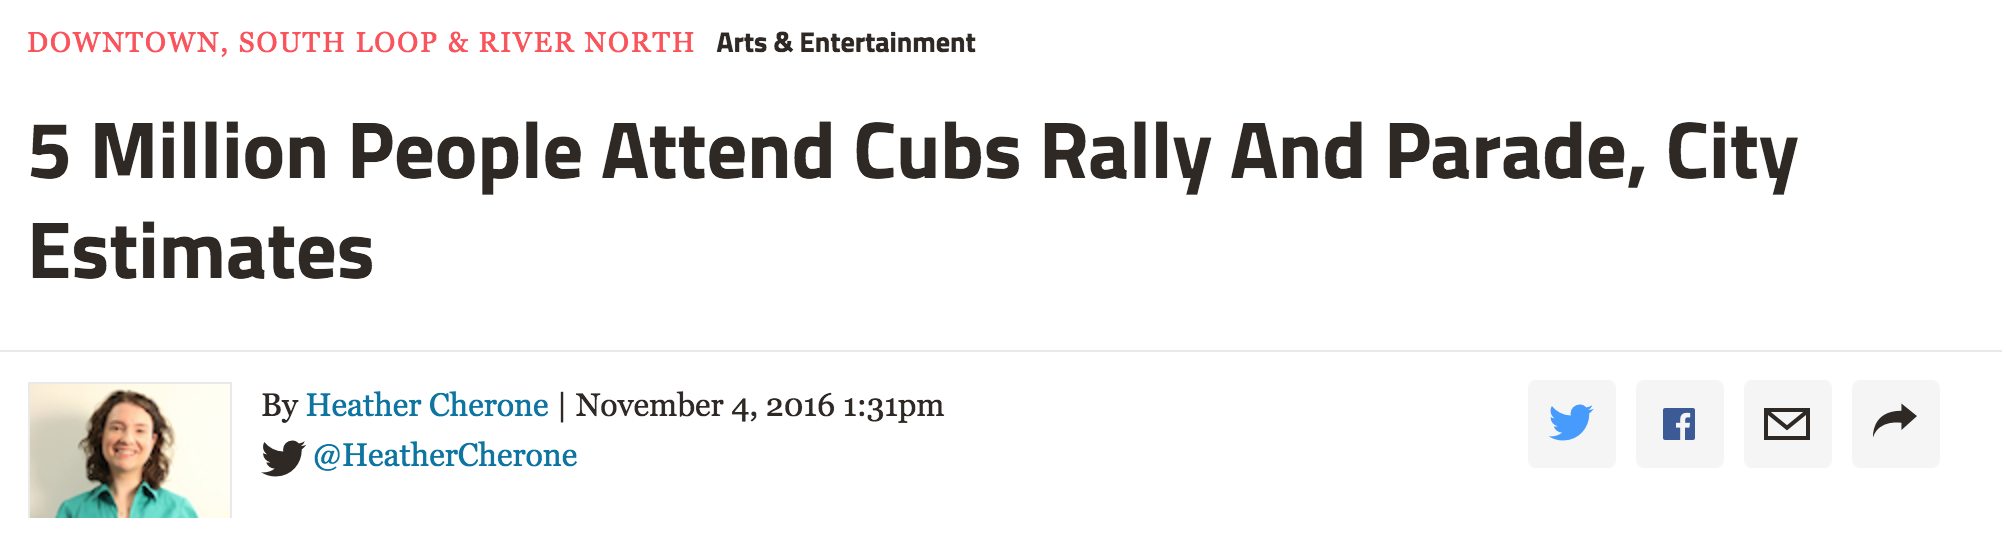 "5 Million People Attend Cubs Rally and Parade, City estimates"